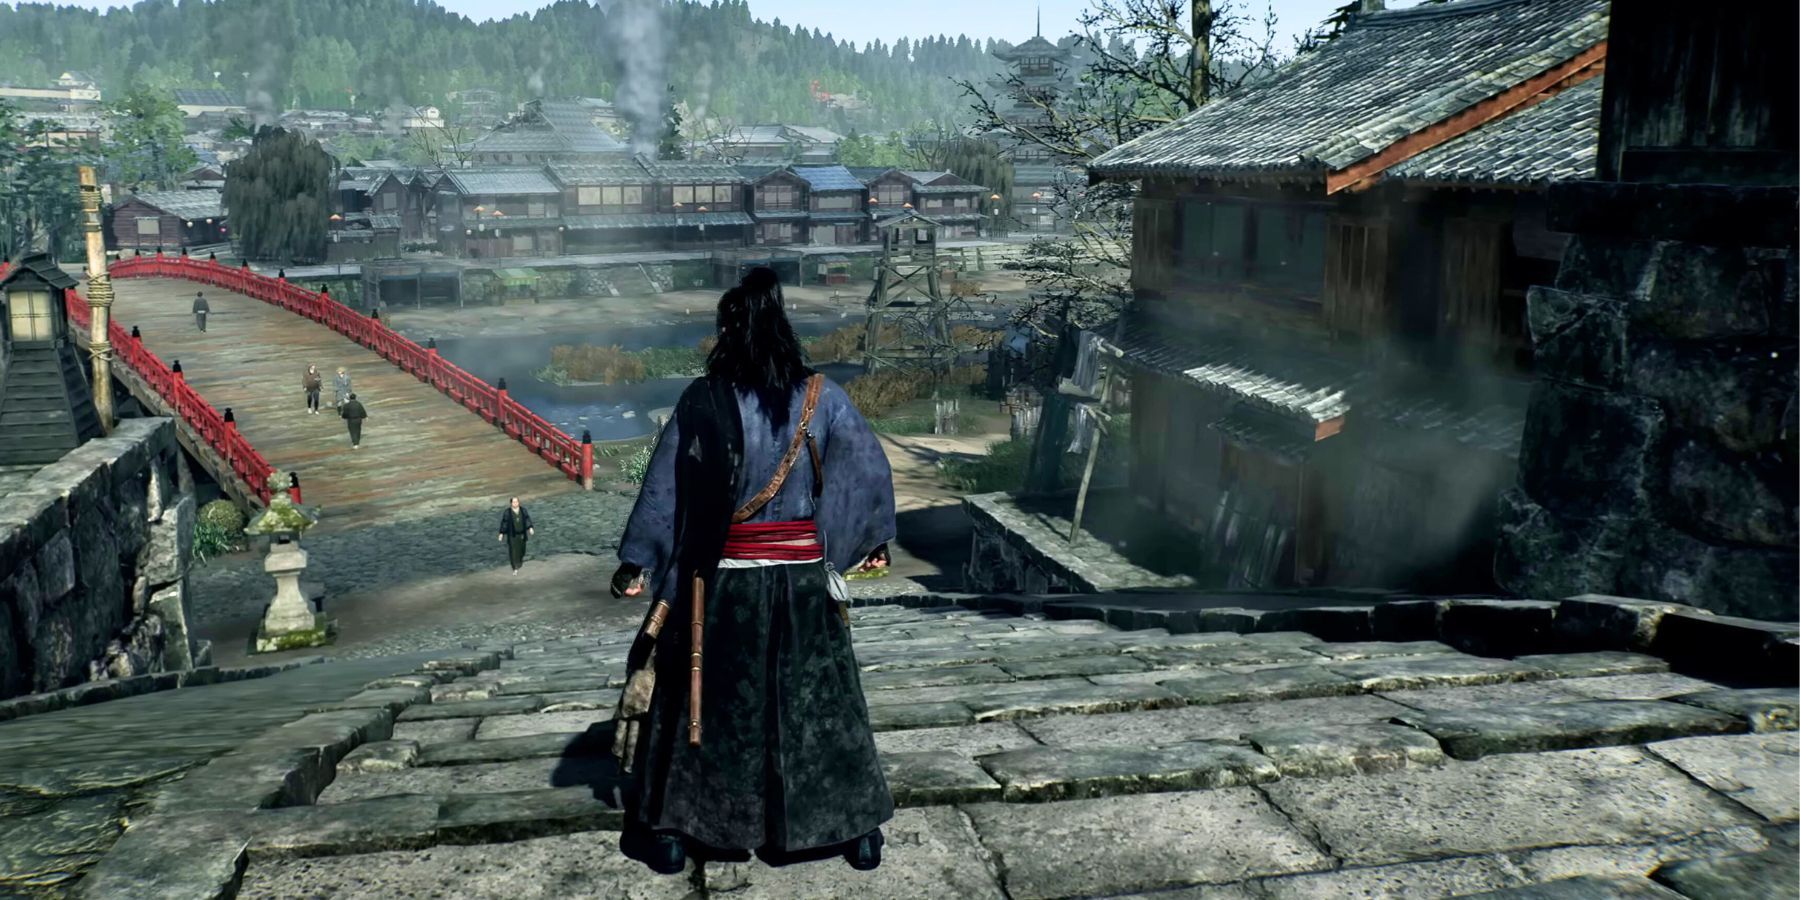 rise of the ronin reveals more gameplay details, including 4-player co-op